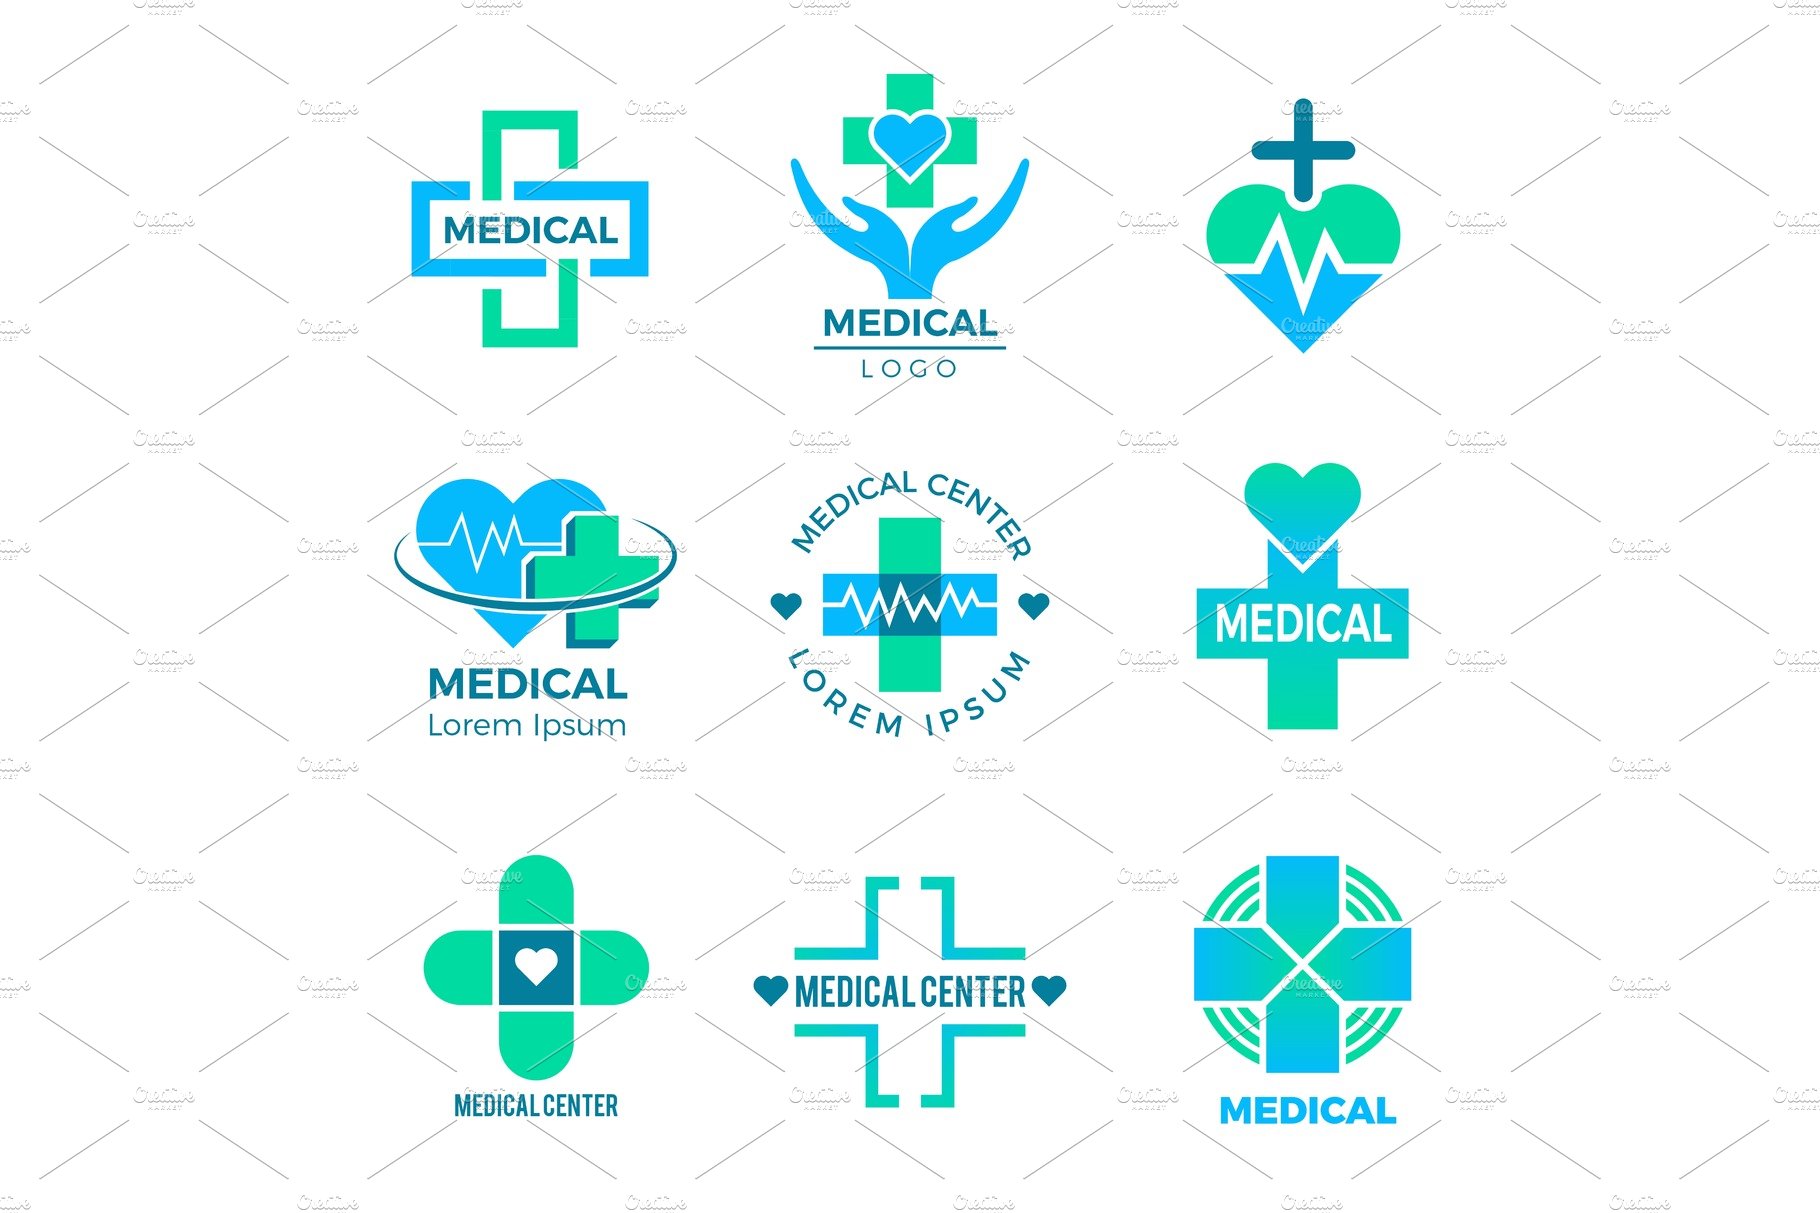 Health symbols. Medical signs for cover image.